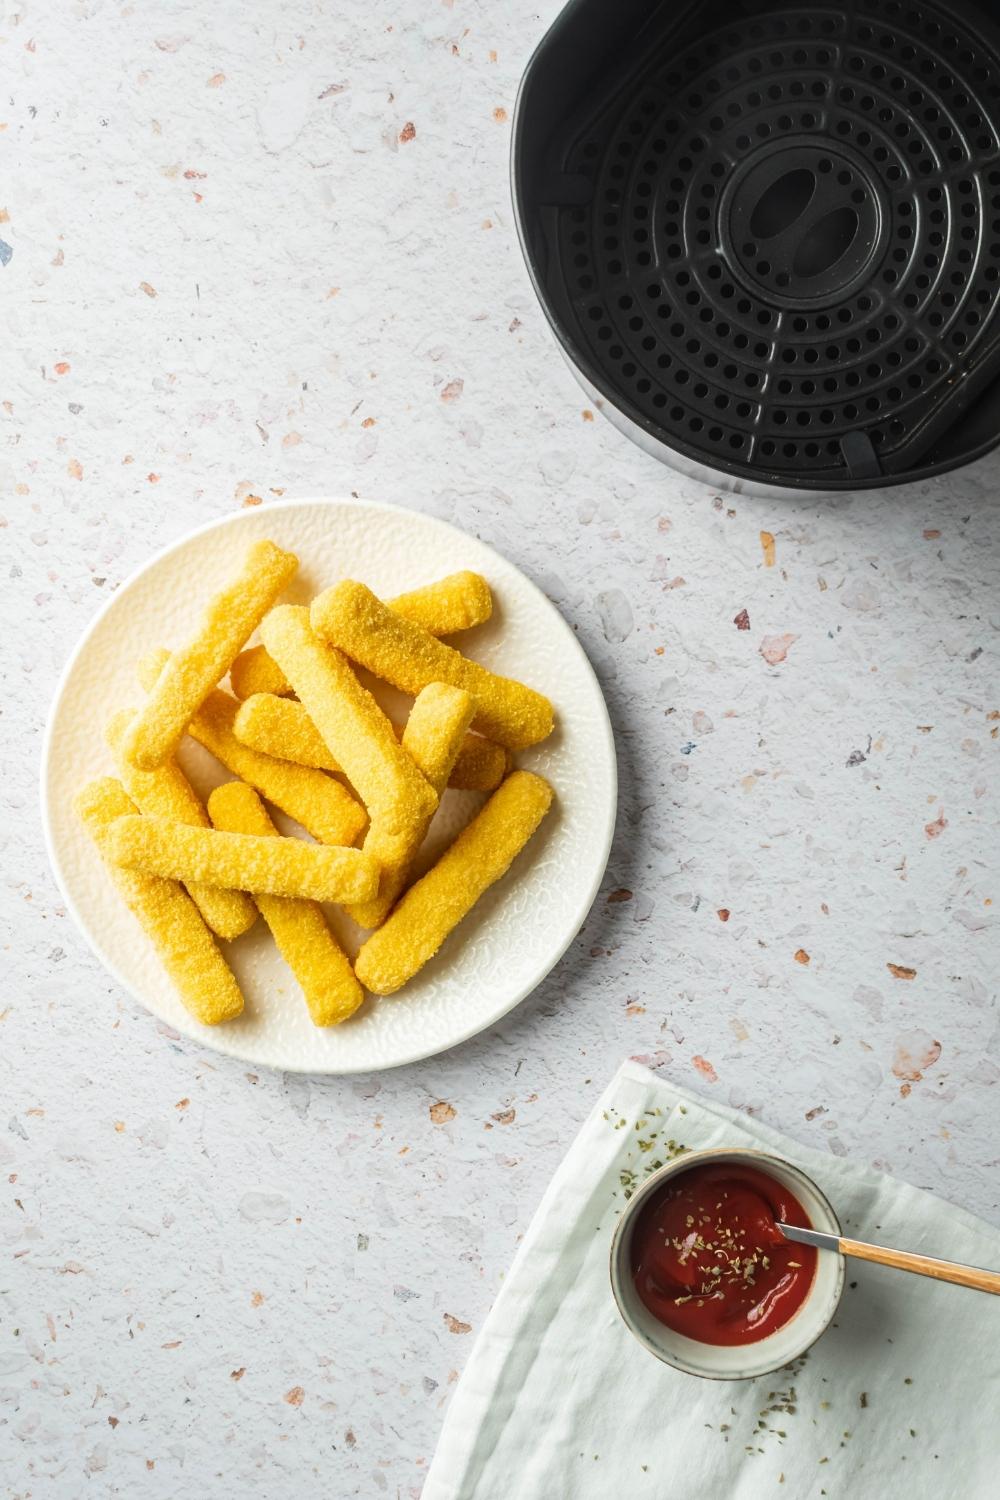 A white plate with a bunch of frozen mozzarella sticks on it. Behind the plate is part of an air fryer.